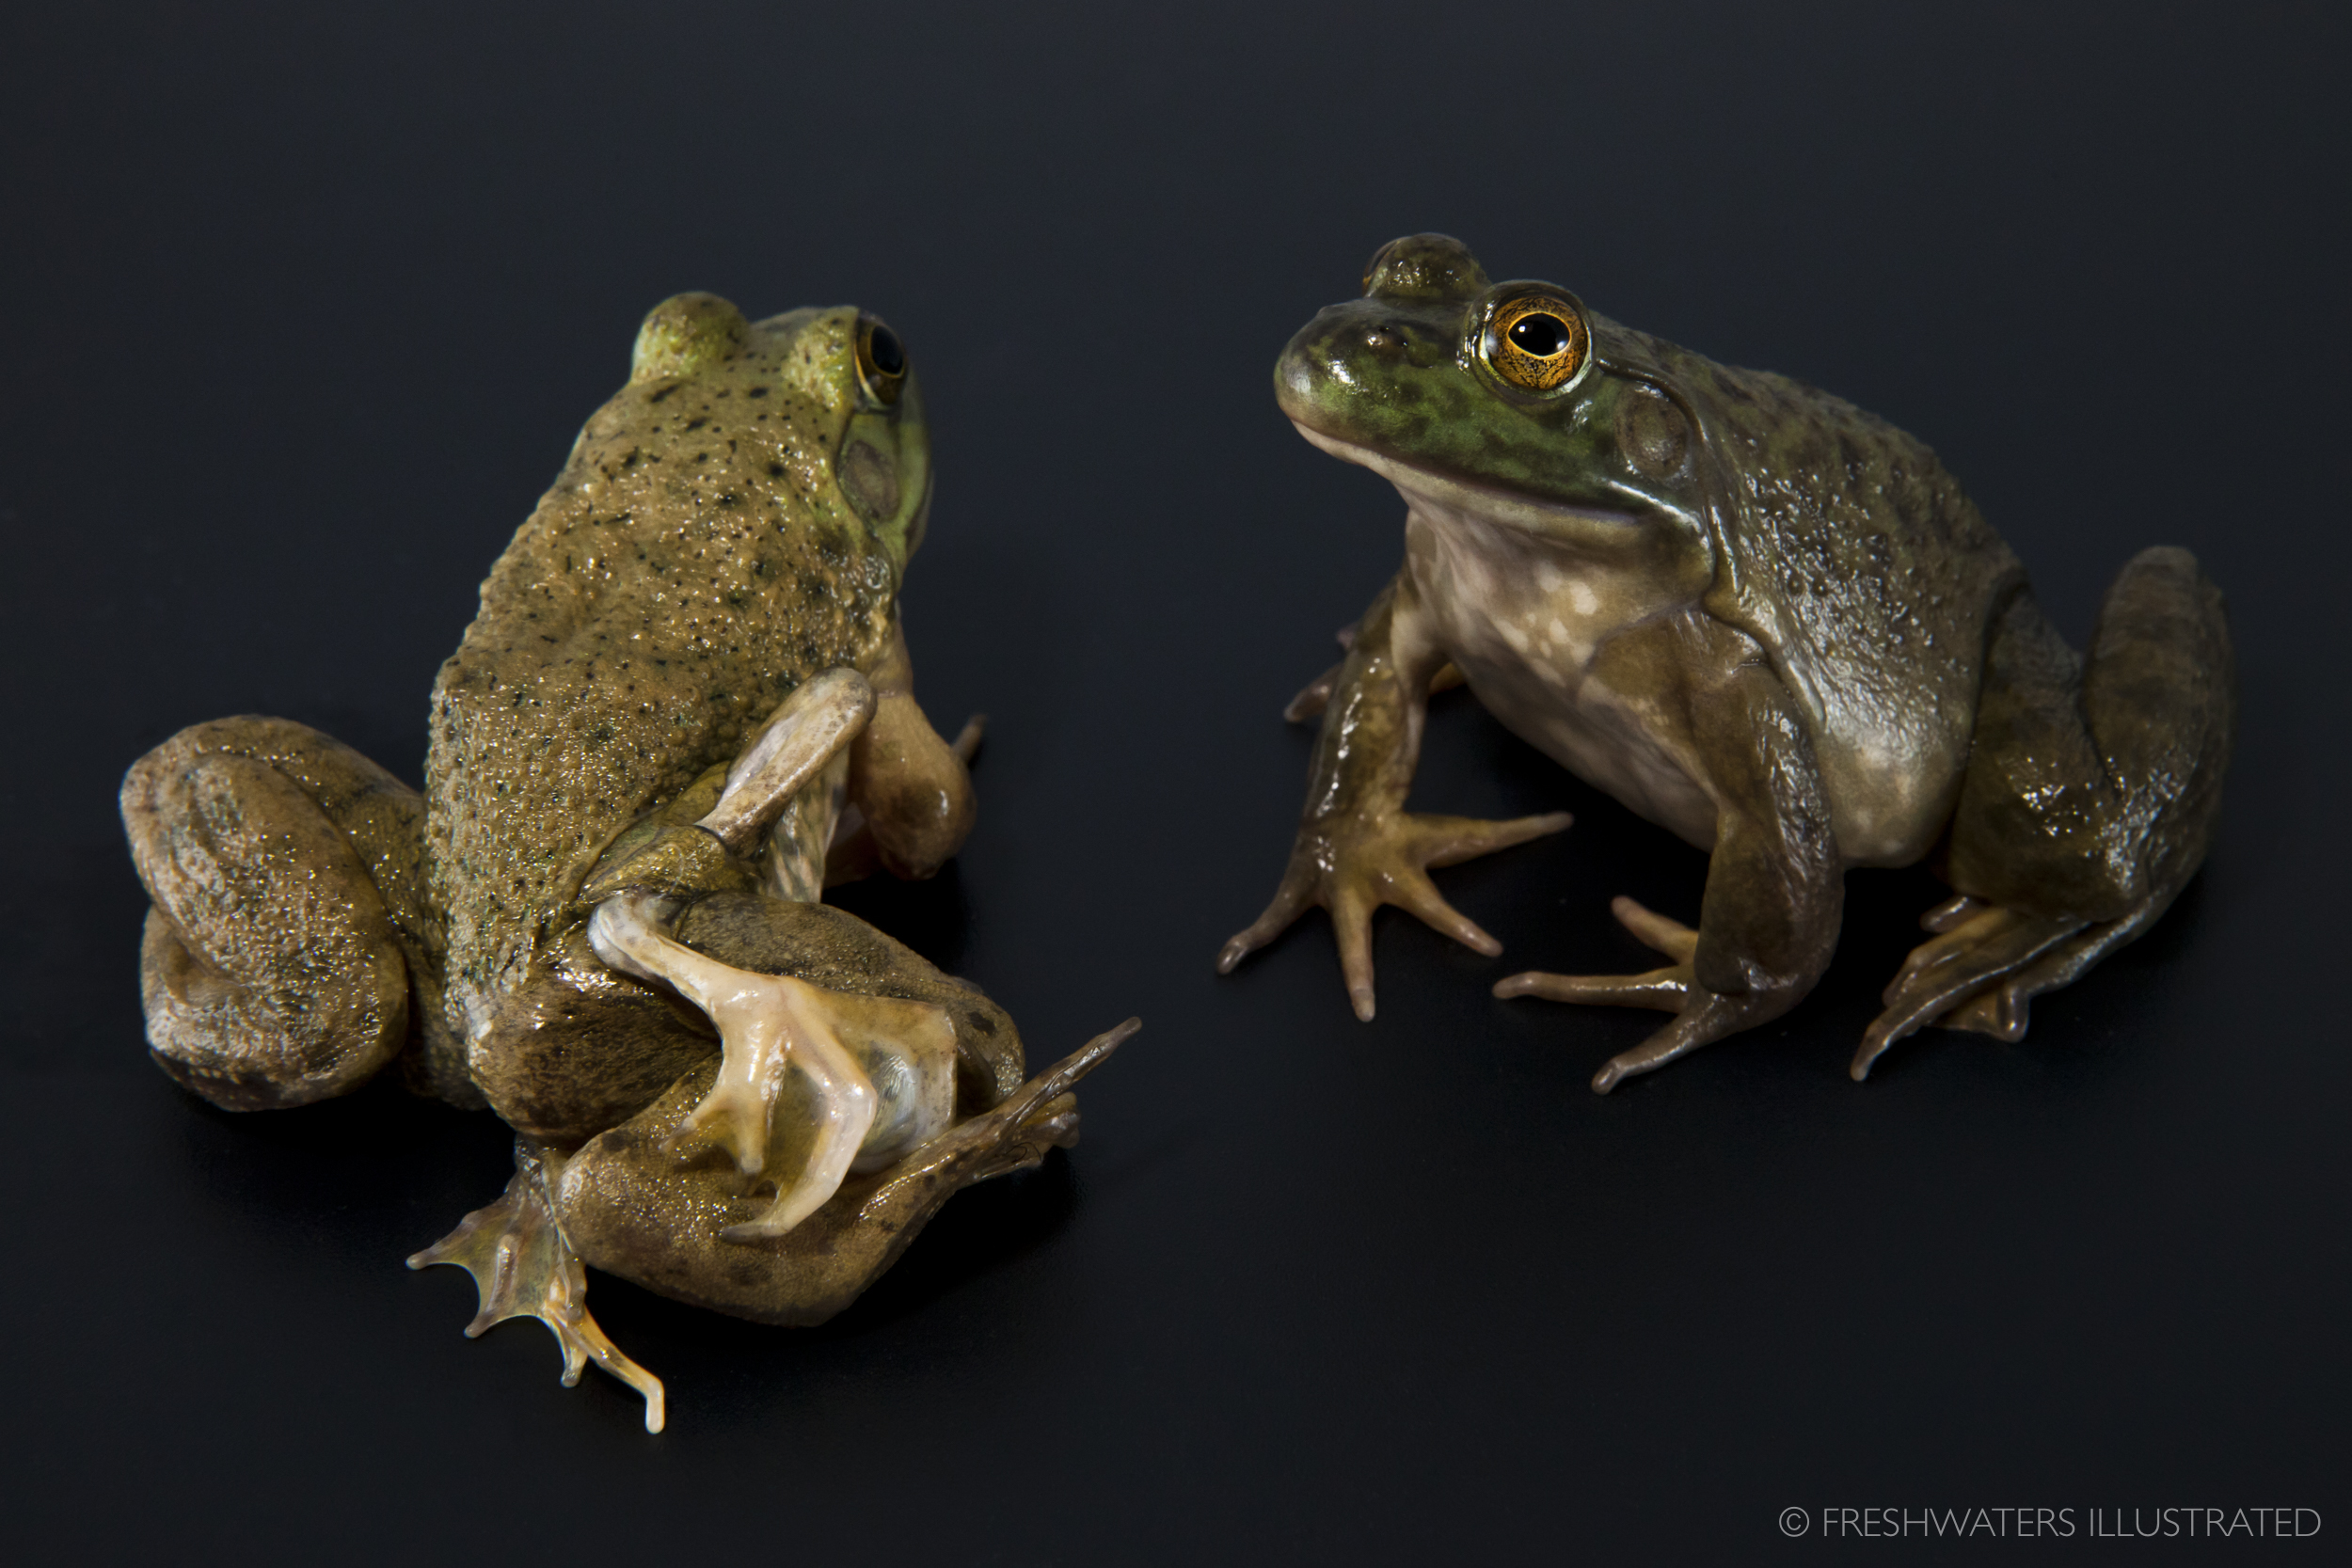  A bullfrog with limb deformities next to a healthy bullfrog.  www.FreshwatersIllustrated.org  